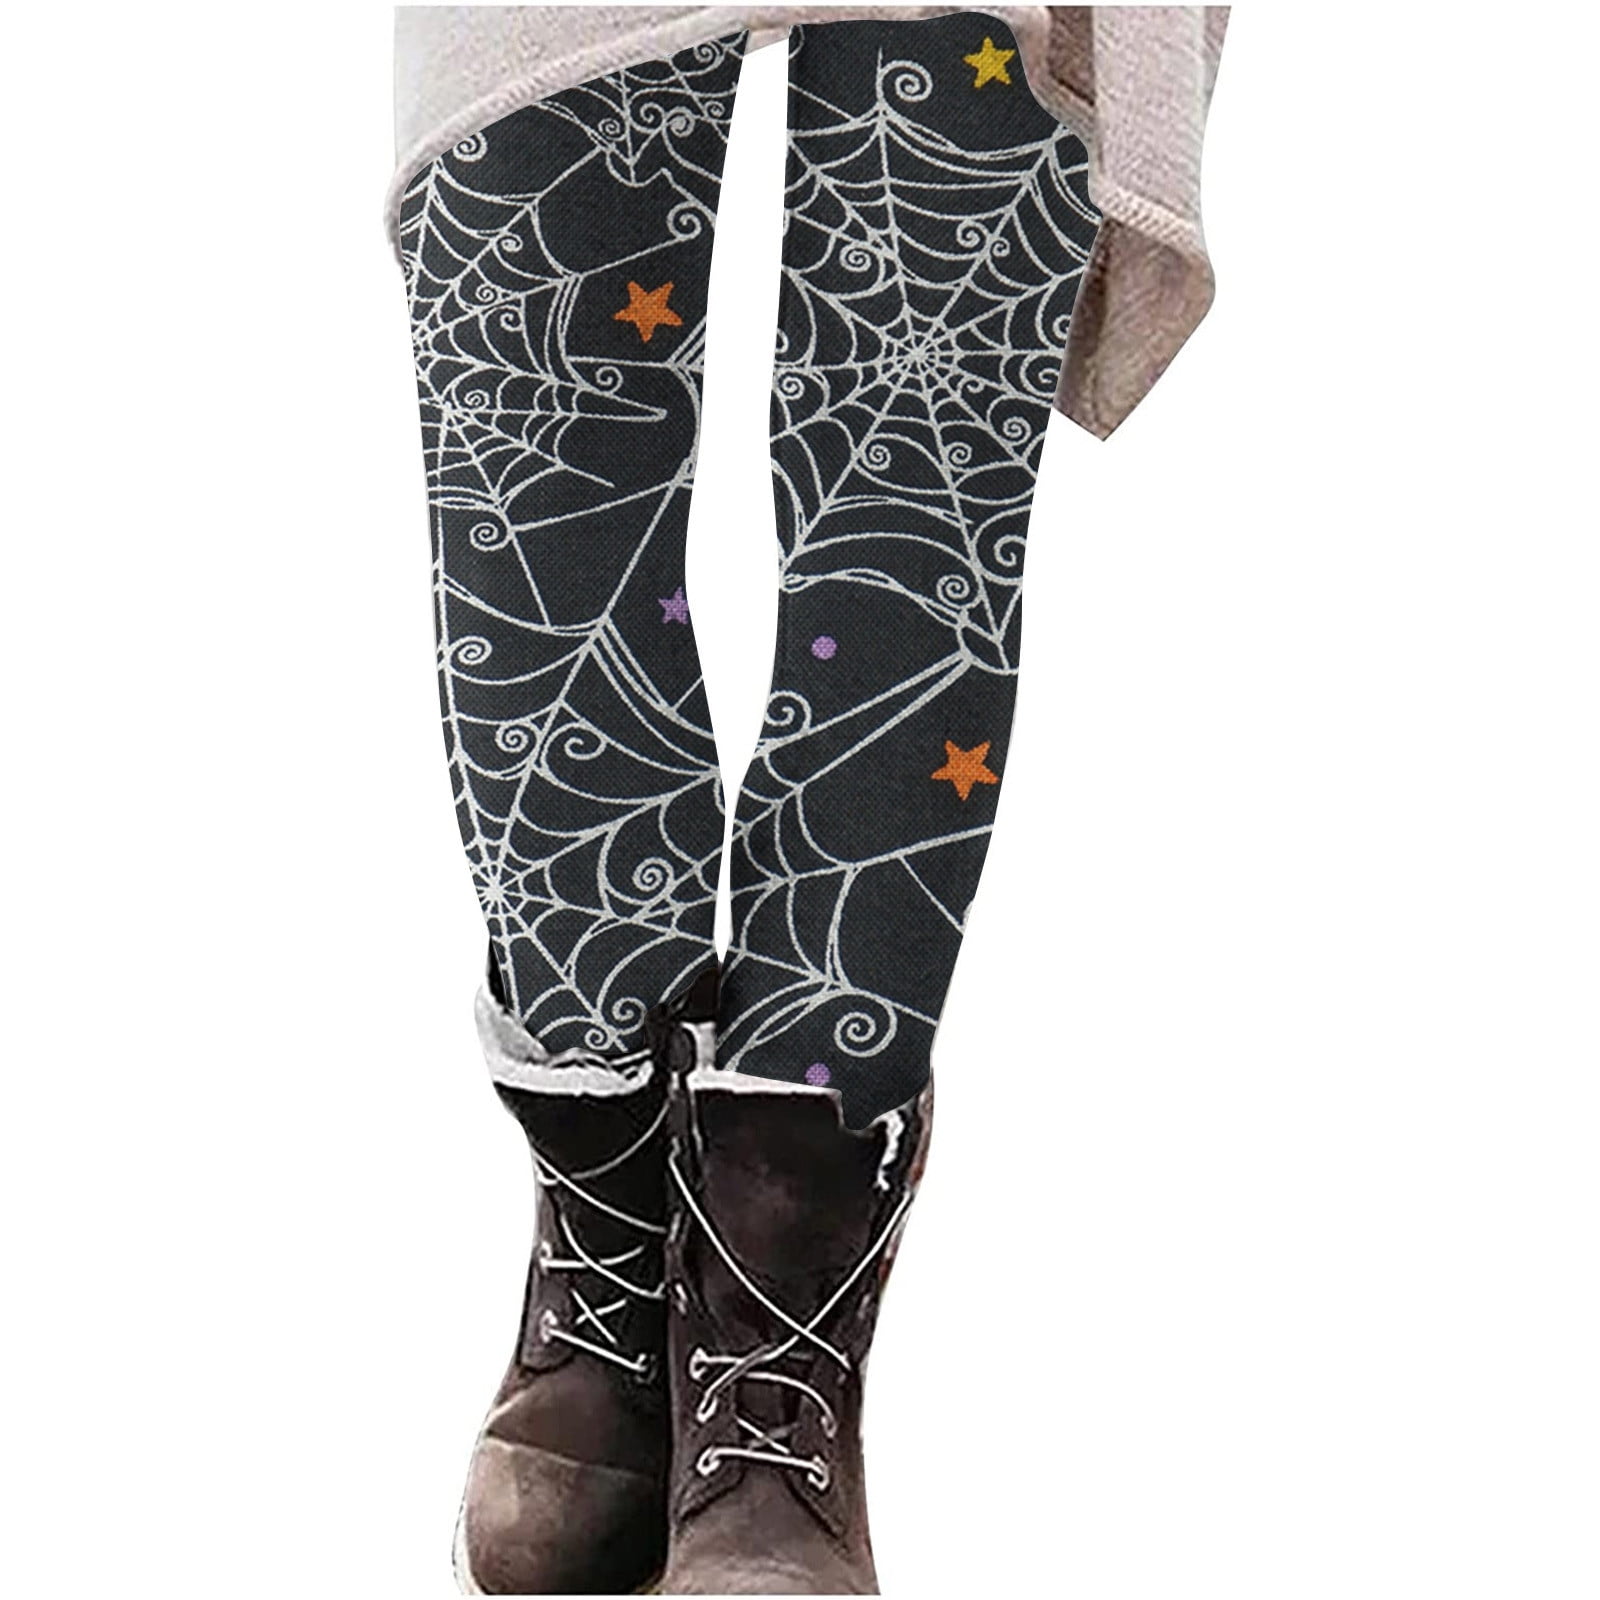 Mrat Parachute Pants for Women Casual Halloween Printed Tight